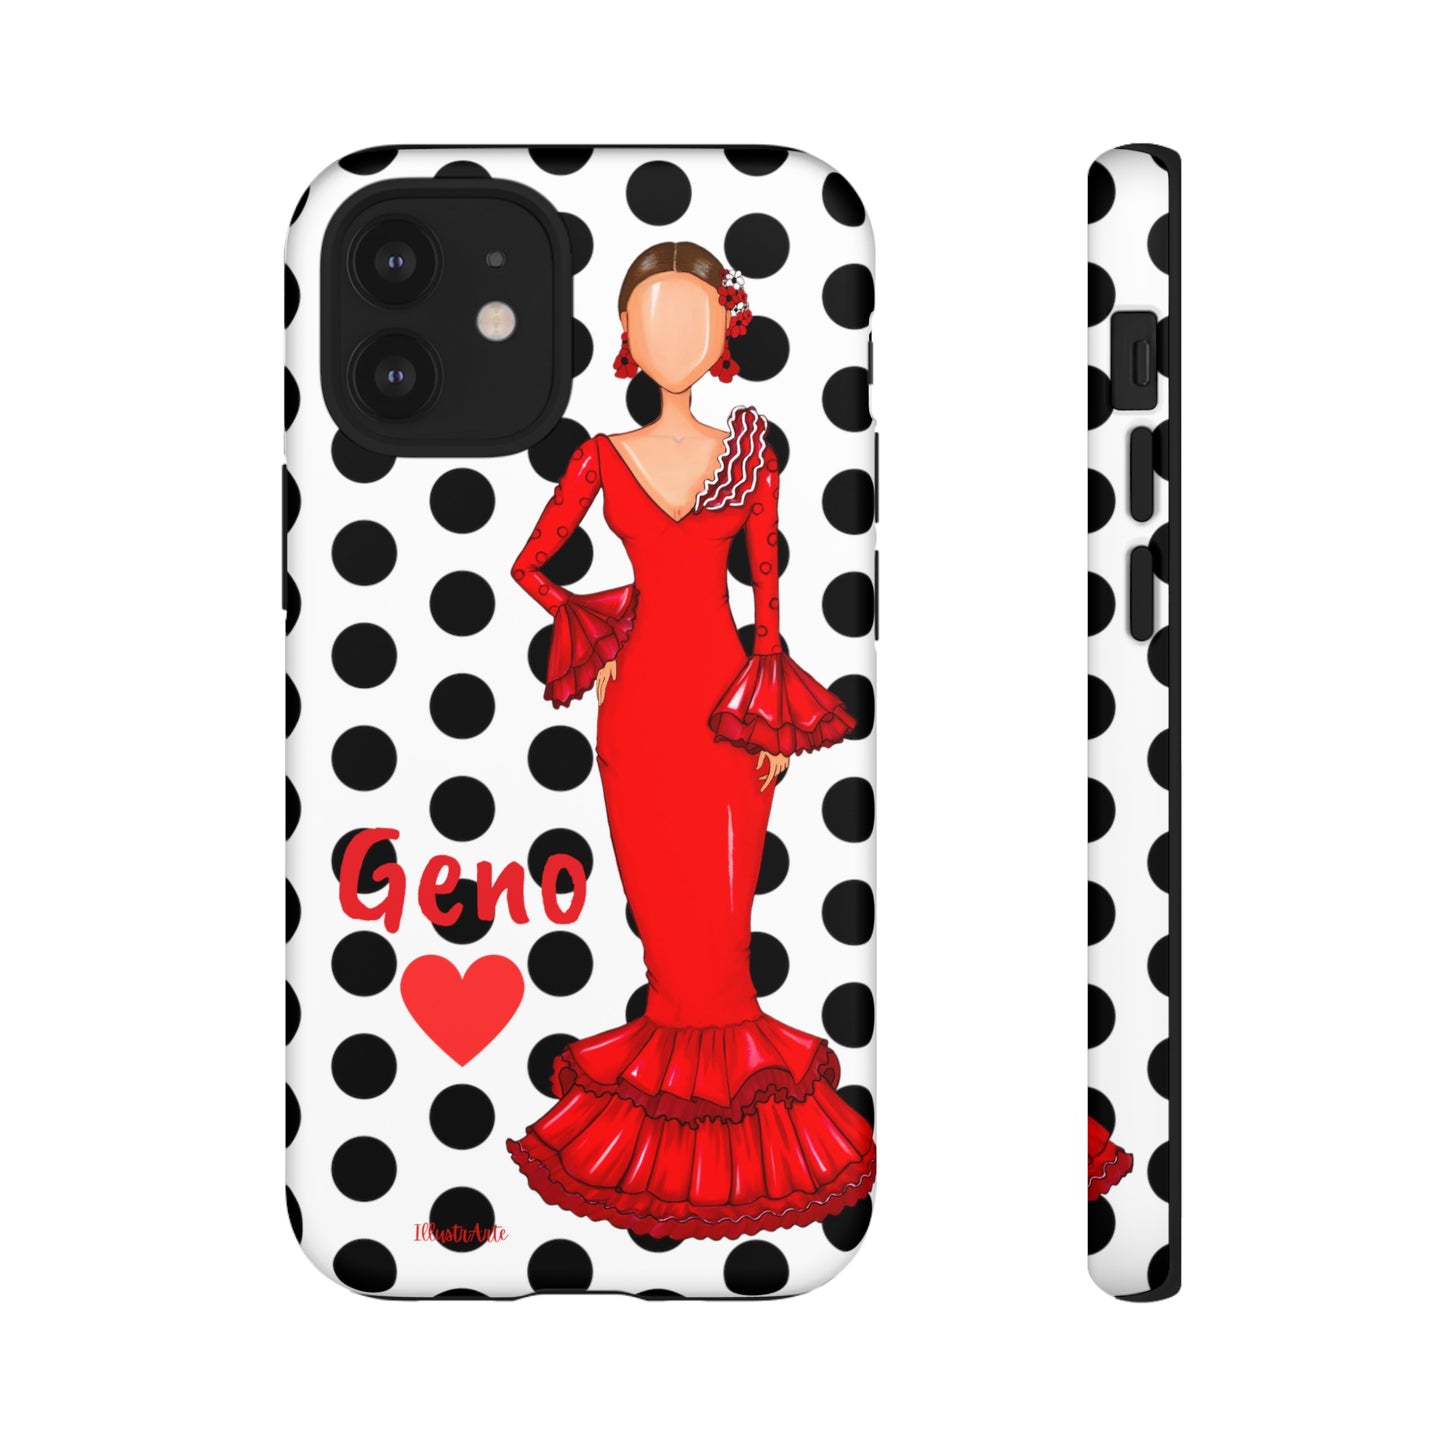 a phone case with a woman in a red dress